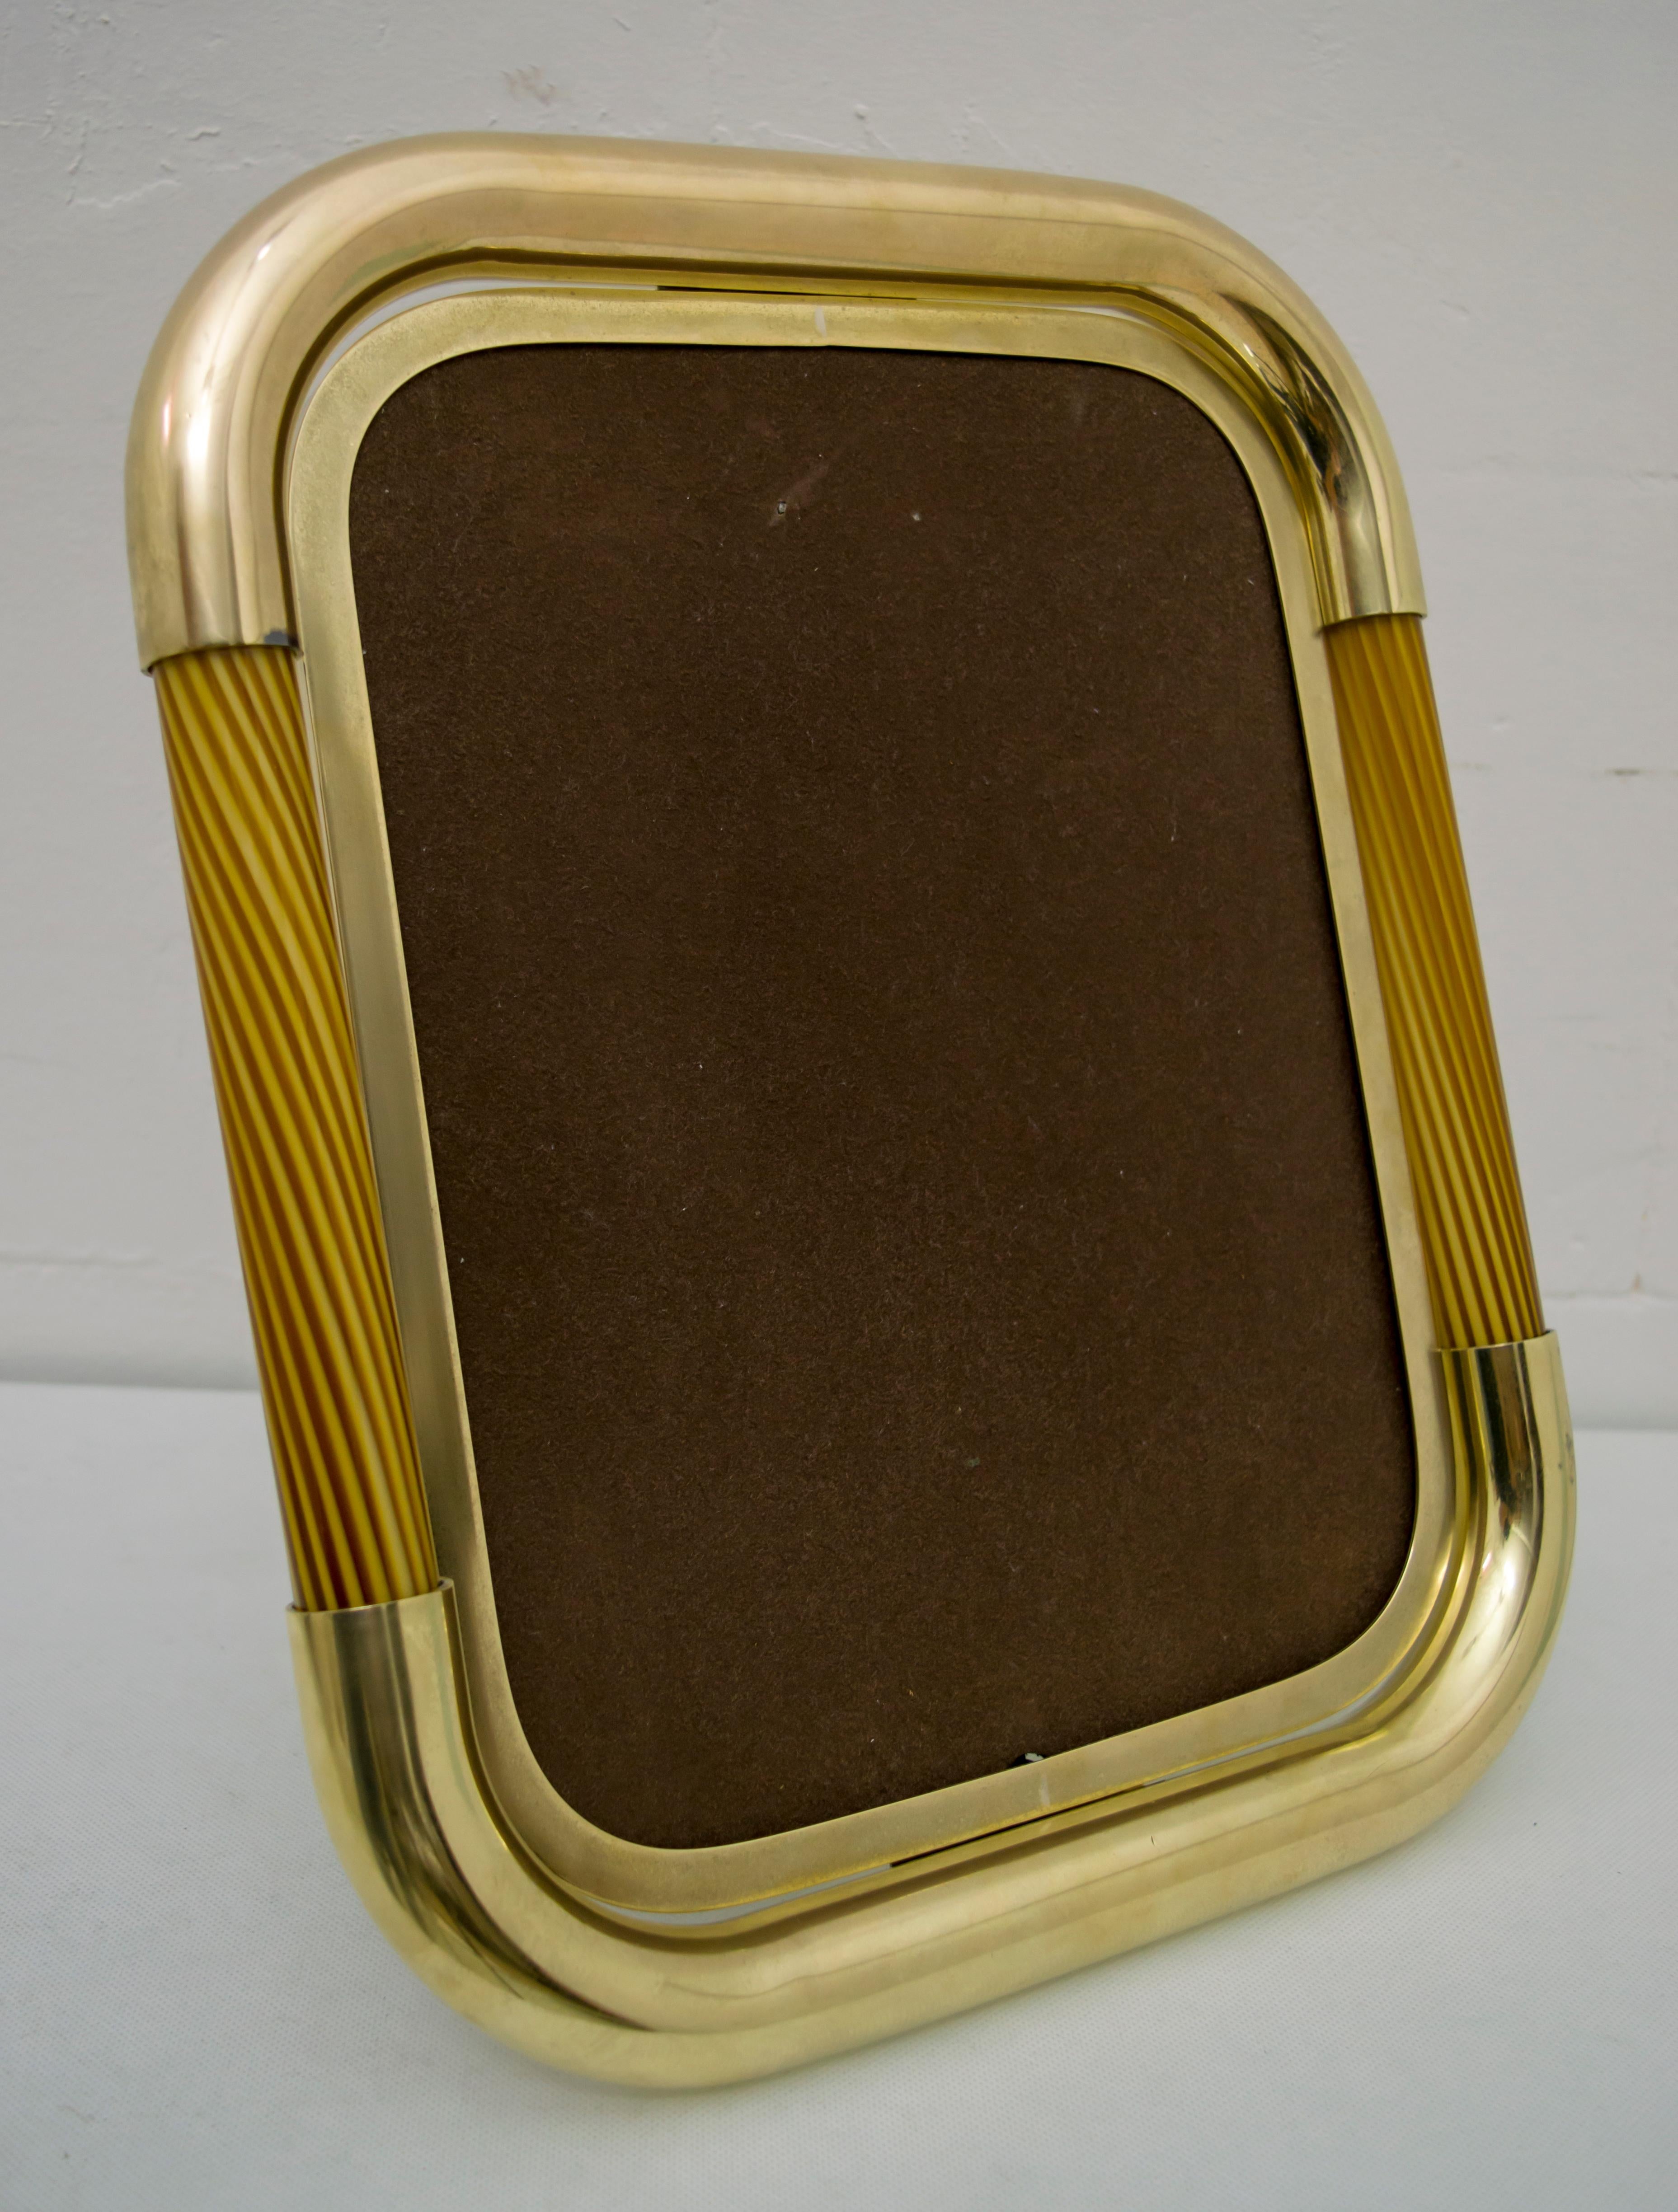 Huge midcentury 1970s frame original iconic designer Tommaso Barbi from Murano manufactured in Italy with a brass plaque inscribed Tomasso Barbi made in Italy.
Remarkable structure in curvilinear brass with beautiful glass rod inserts, mouth-blown